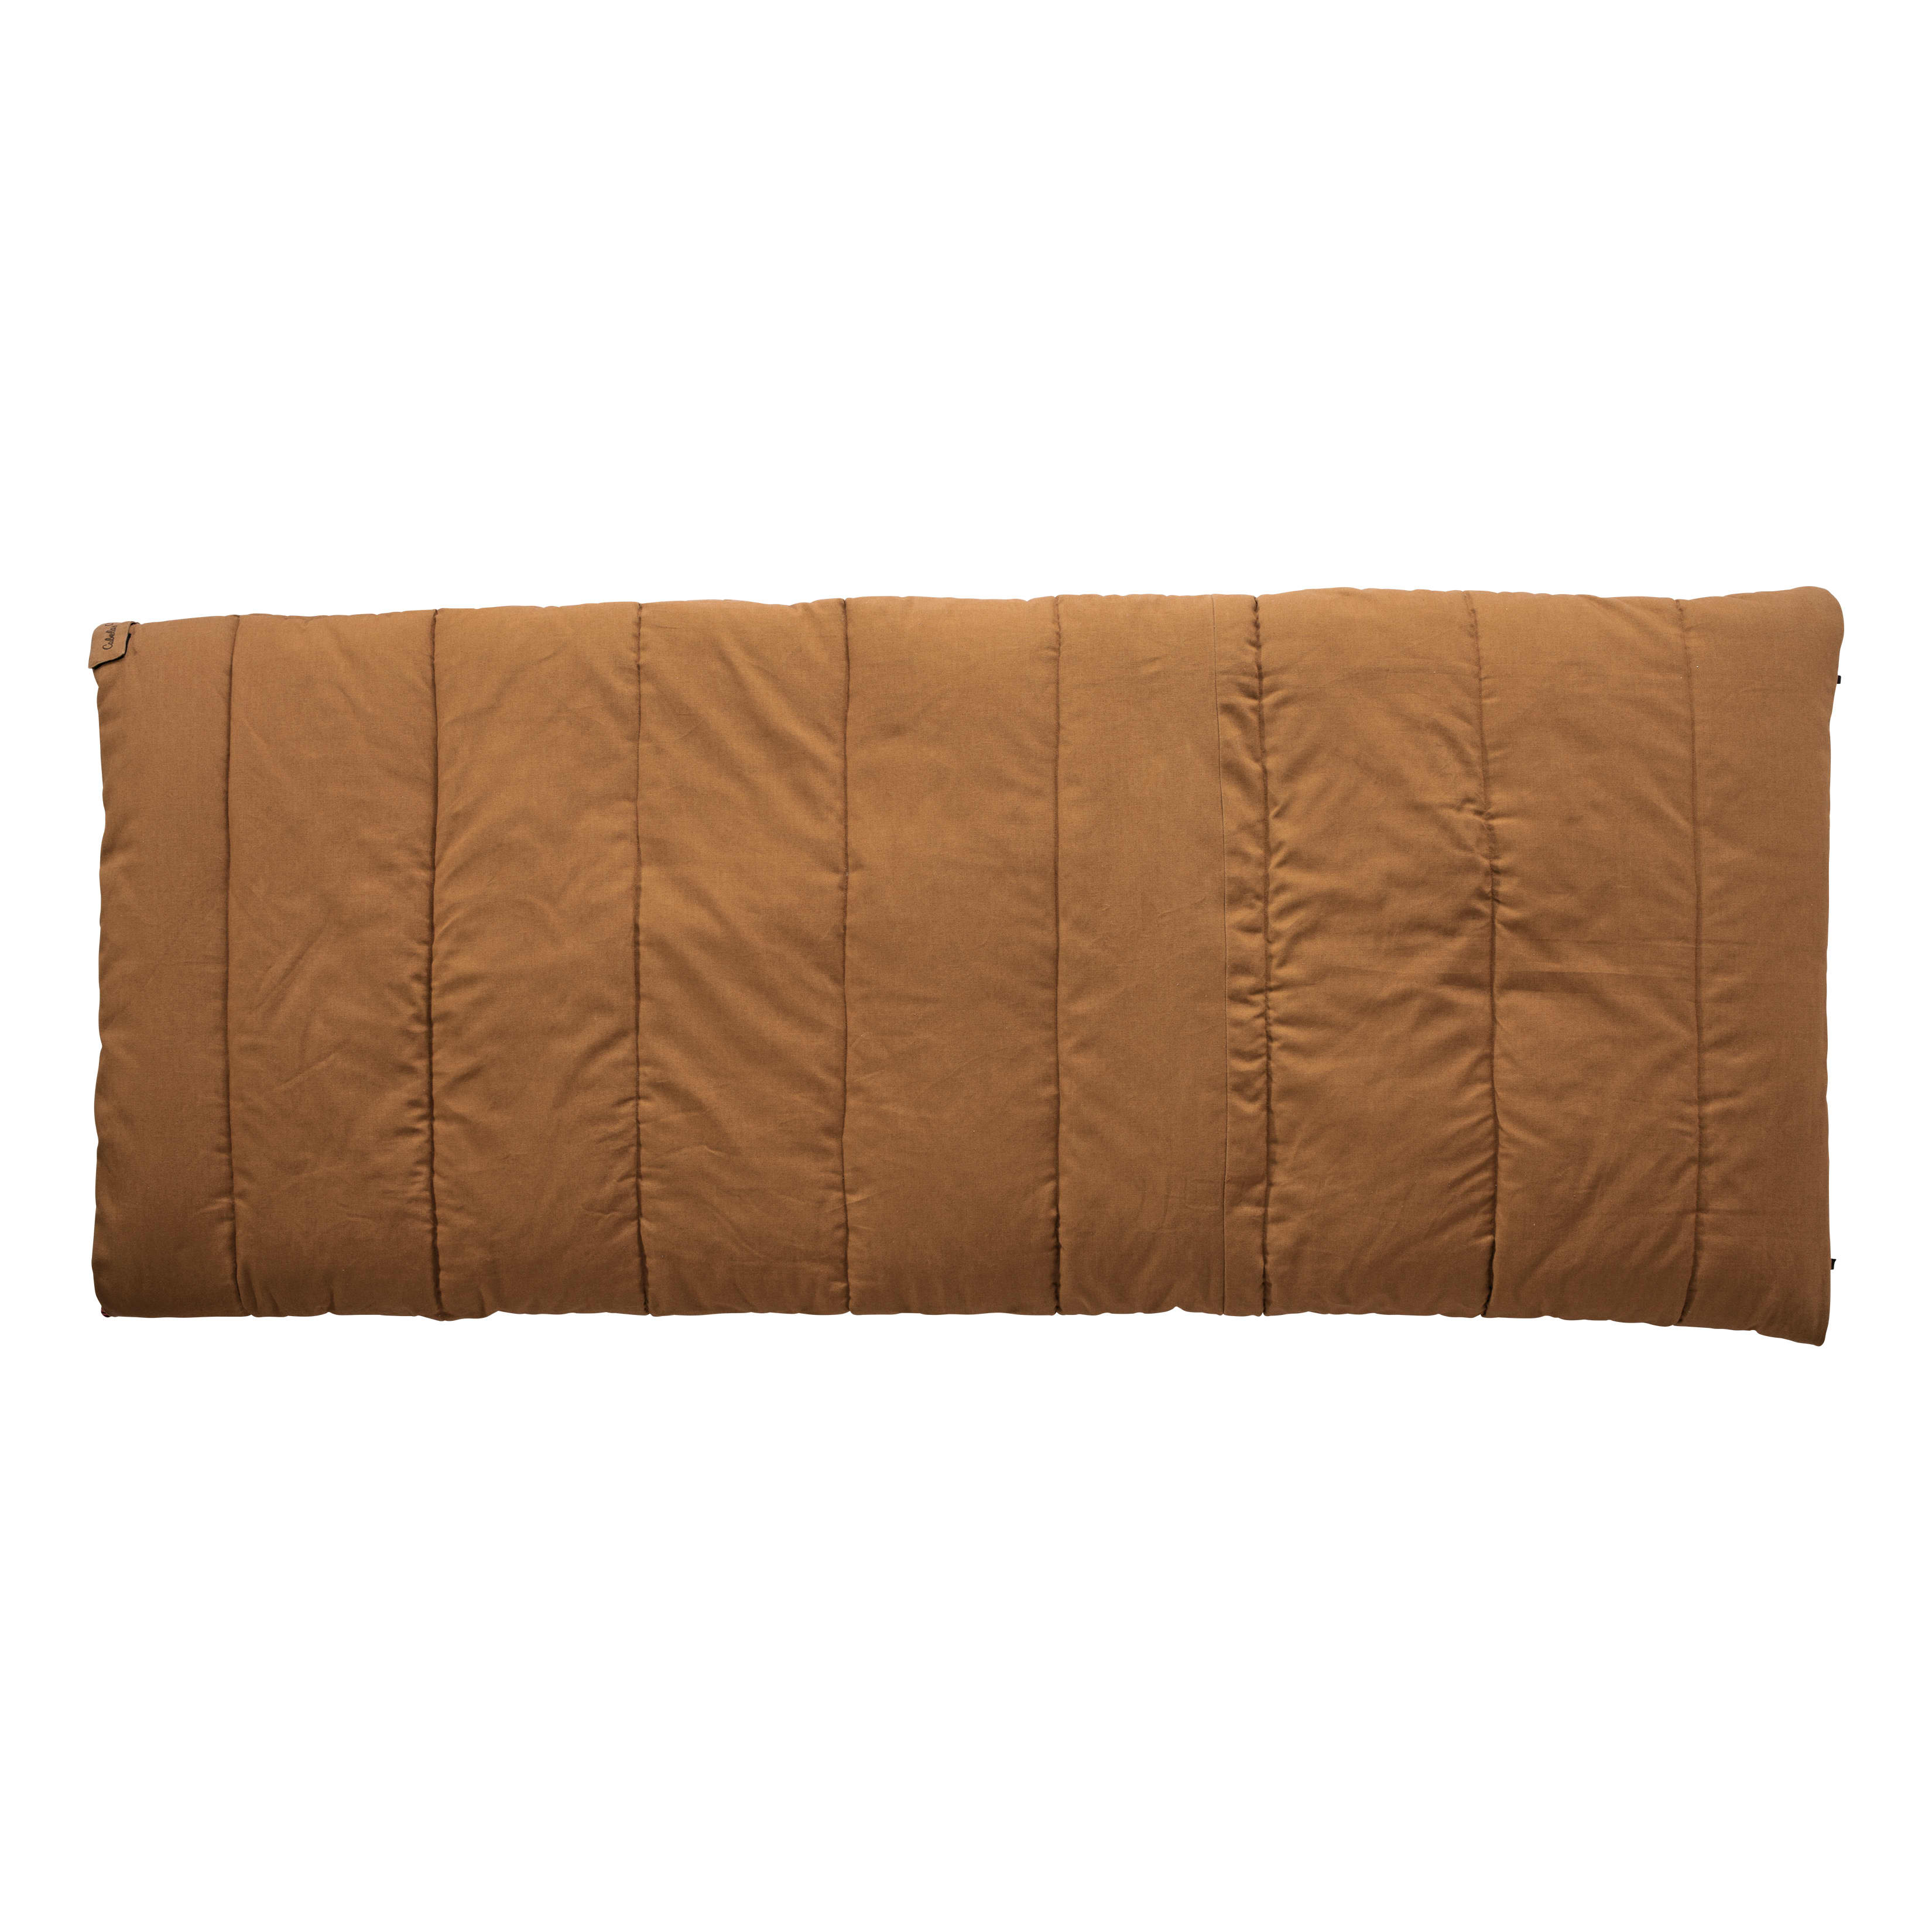 Cabela’s Mountain Trapper Sleeping Bags - Closed View